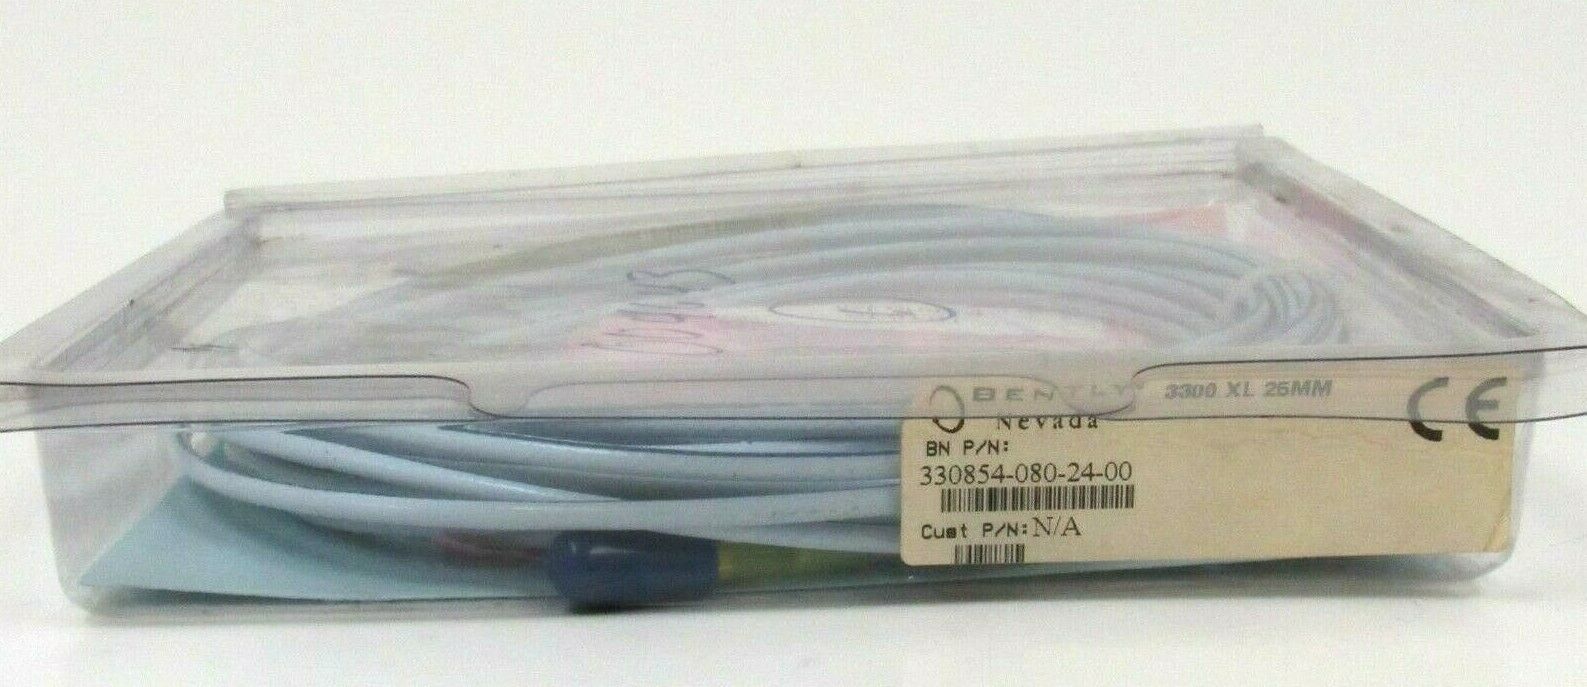 Bently Nevada 3300 XL 25mm 330854-080-24-00 sensor probe extension cable 8m 